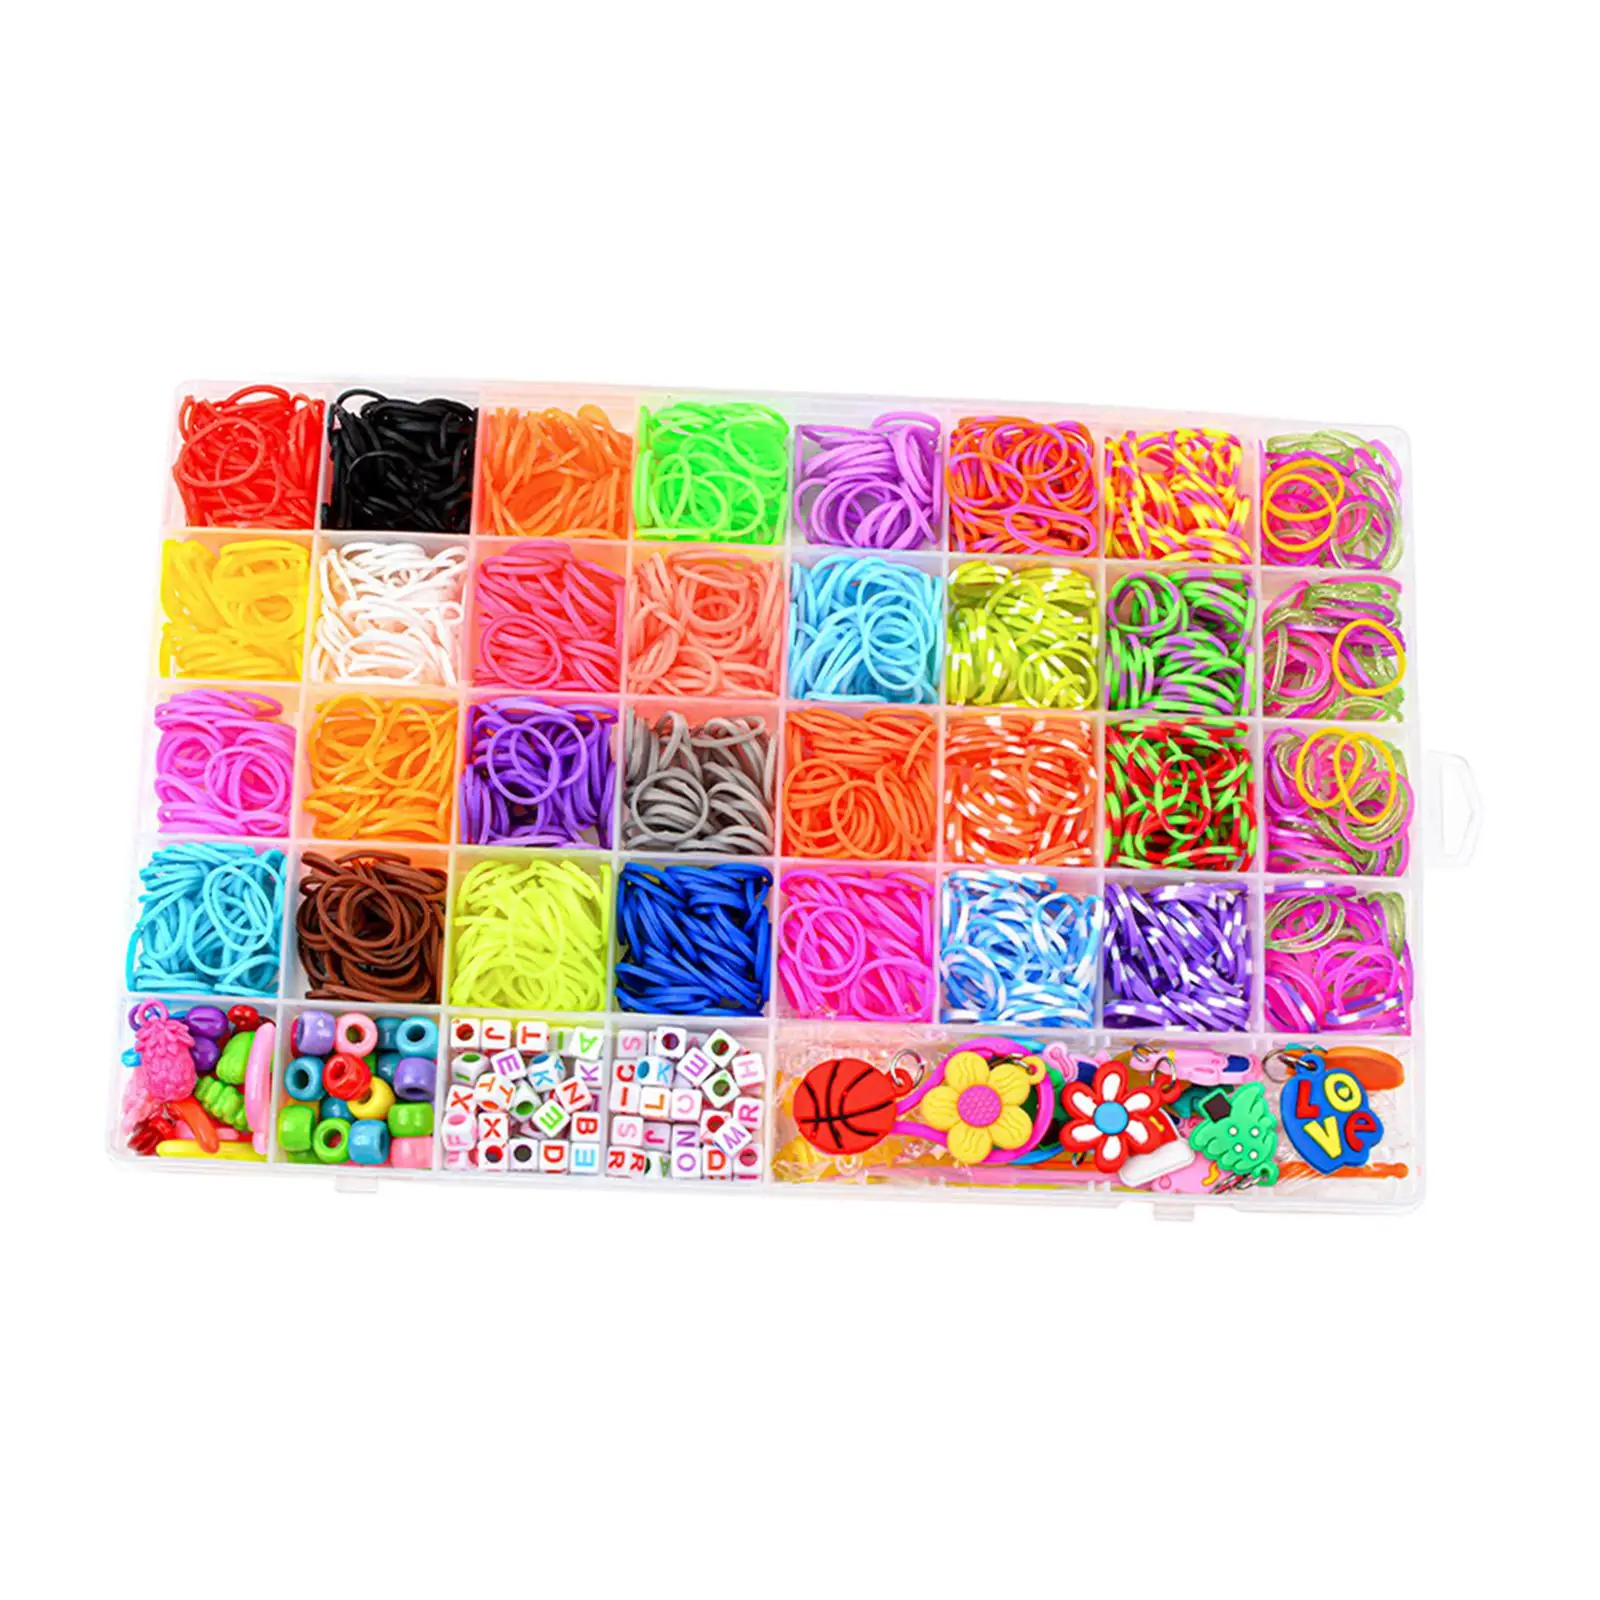 Kids Loom Bracelet Making Kit Colors Rubber Bands Accessories Practical with Clear Carrying Box Colorful for Girls and Boys